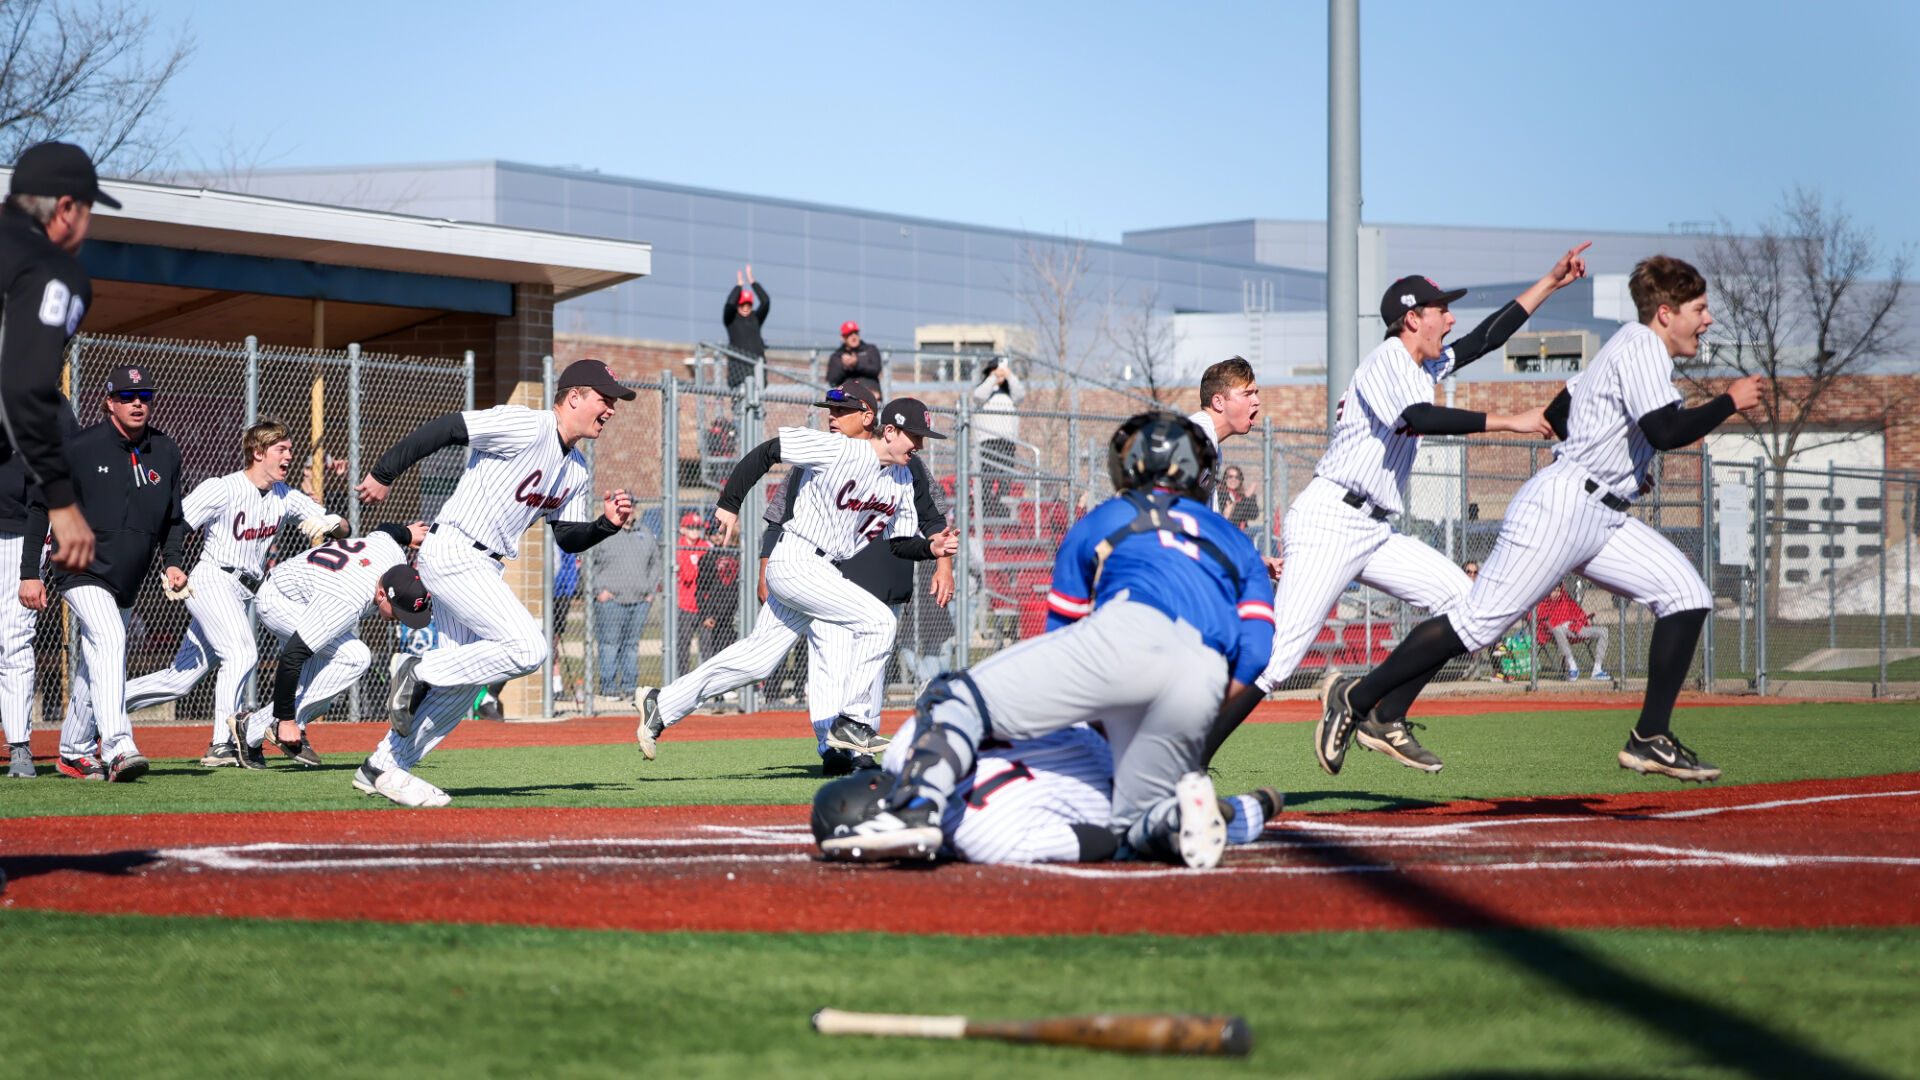 East prevails on opening day with Vogler’s walk-off